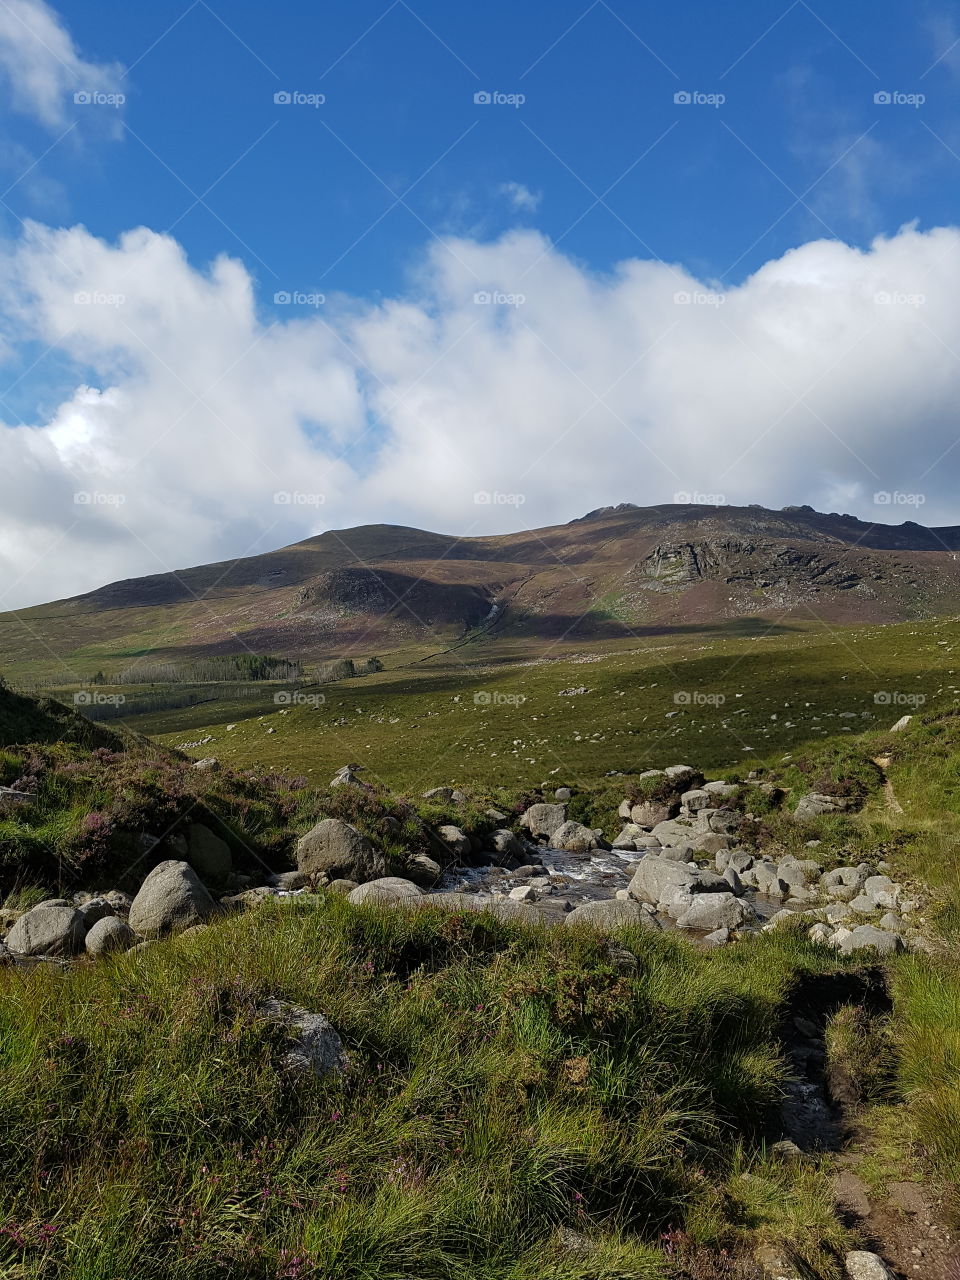 Hiking through the Mourne Mountains in County Down